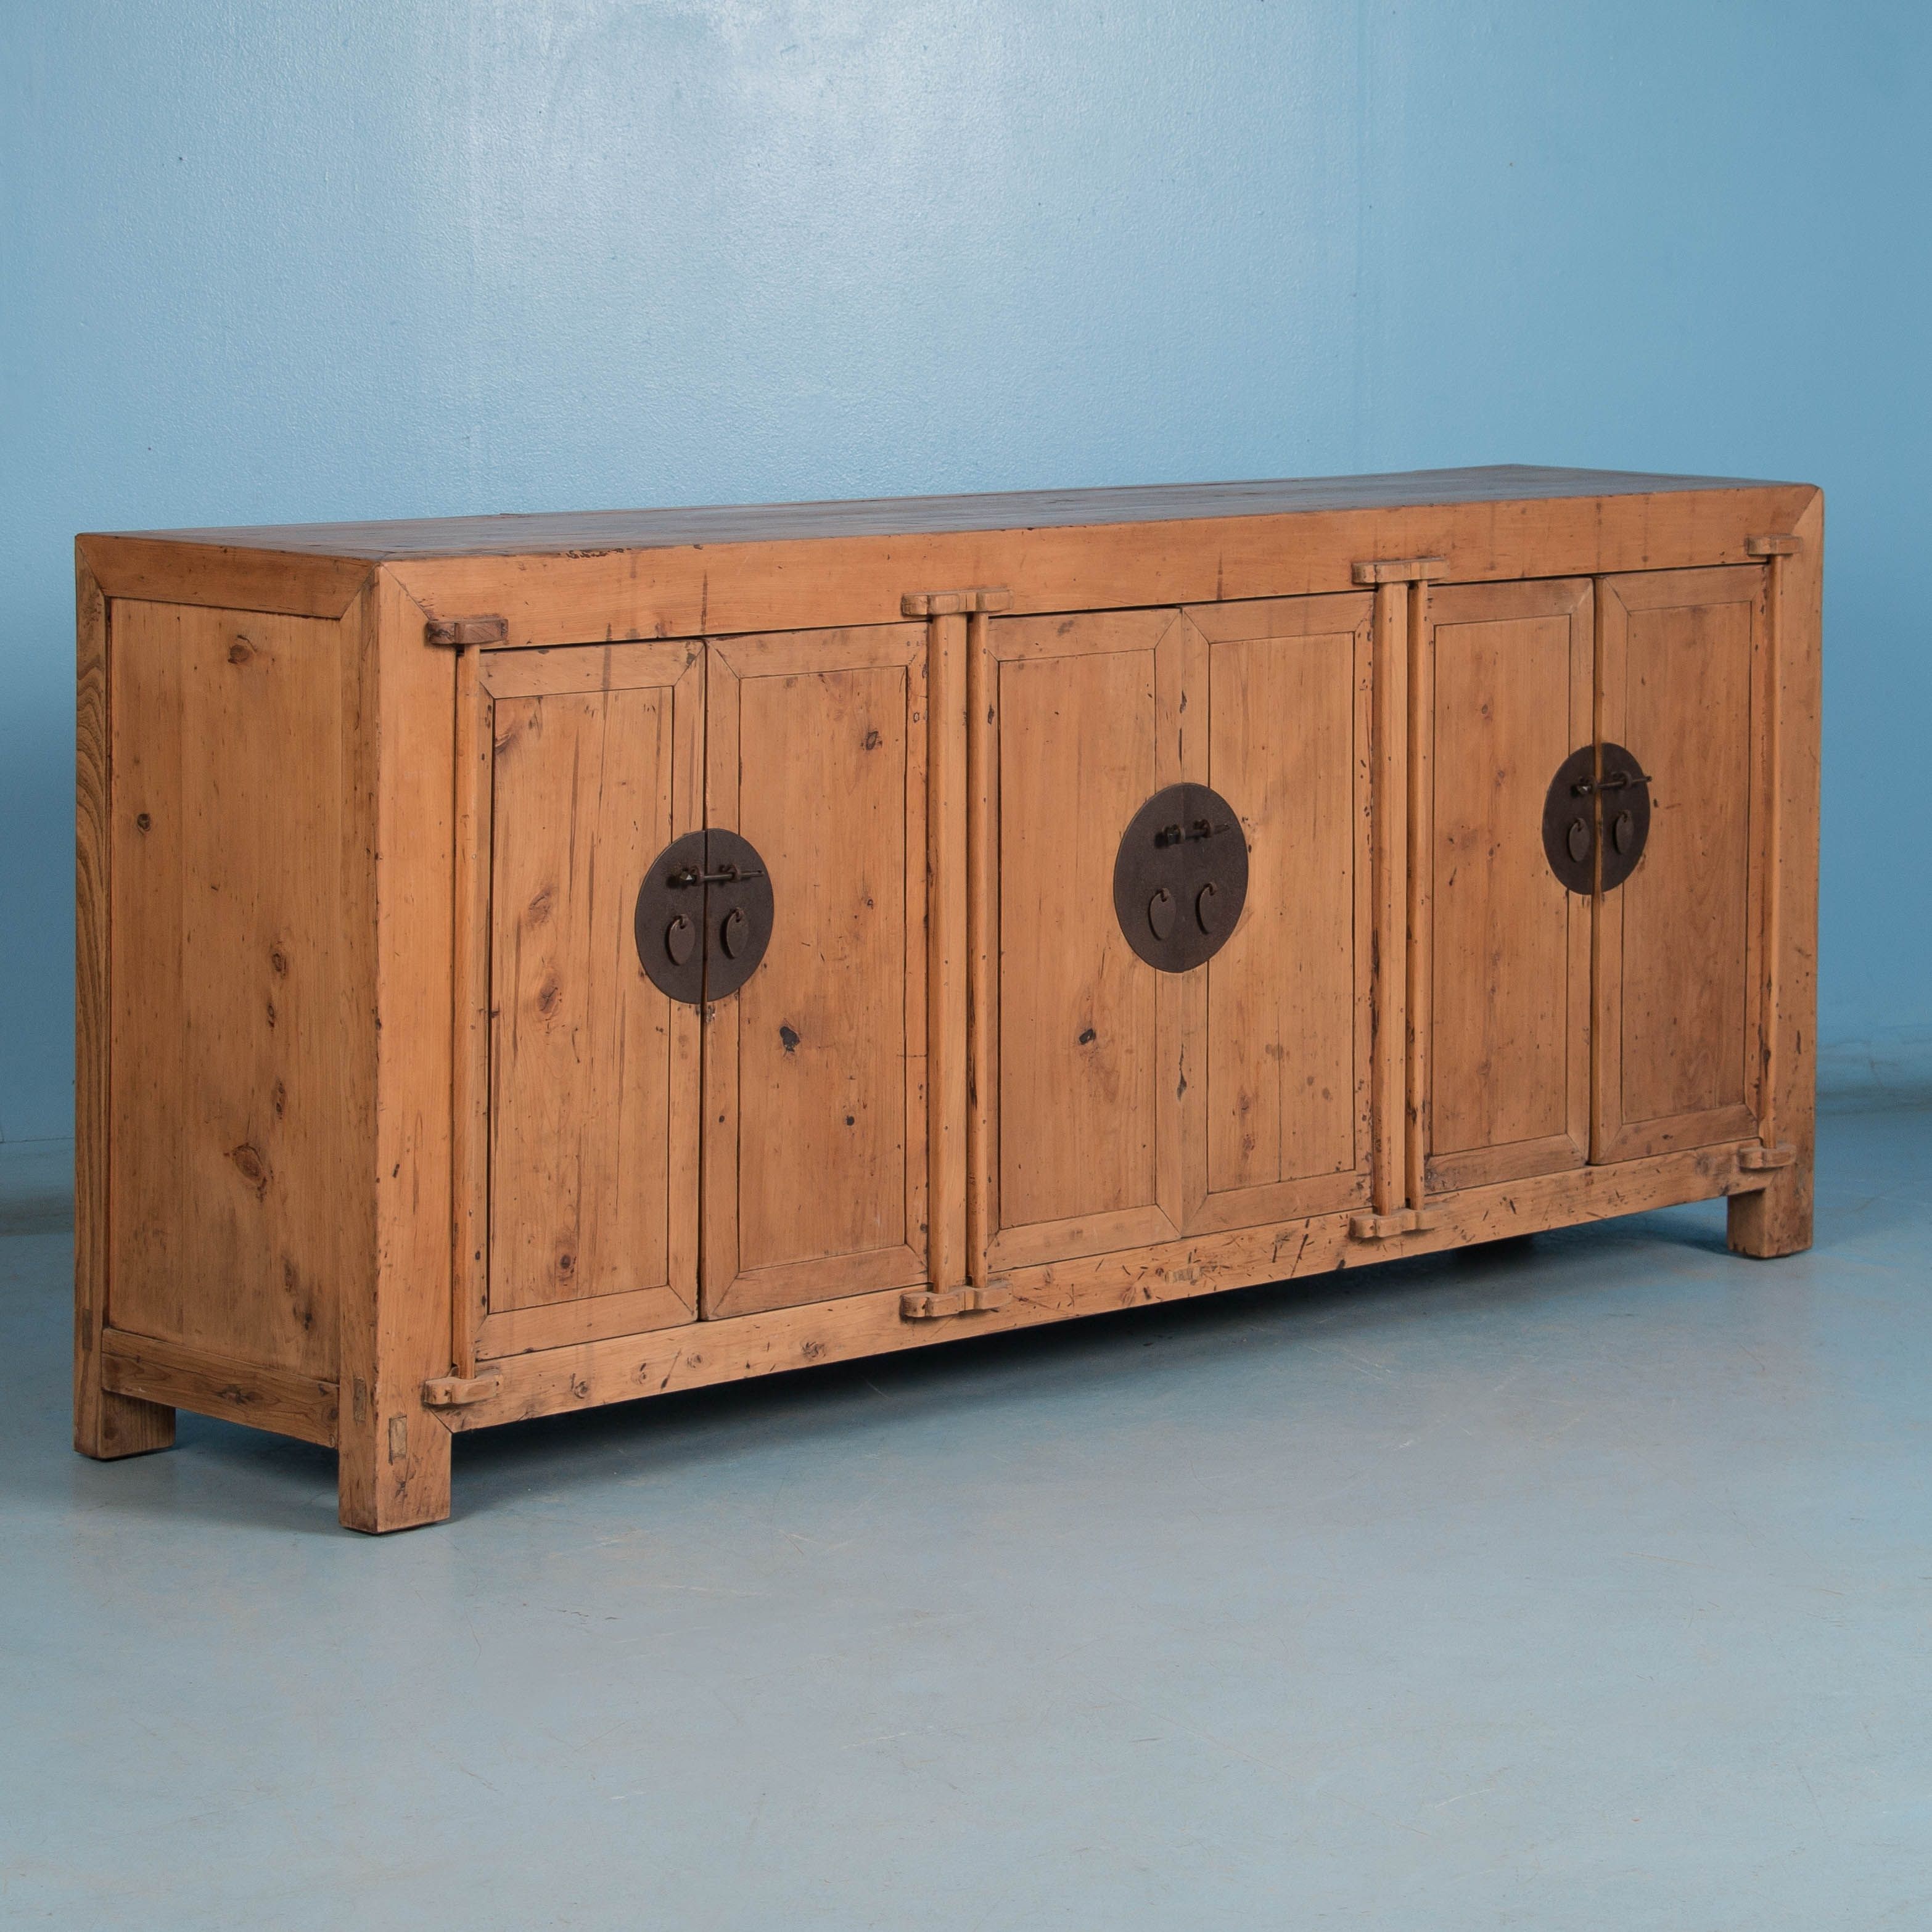 Sideboards | Scandinavian Antiques | Antique Furniture For Sale With Regard To 2018 Natural South Pine Sideboards (View 3 of 20)